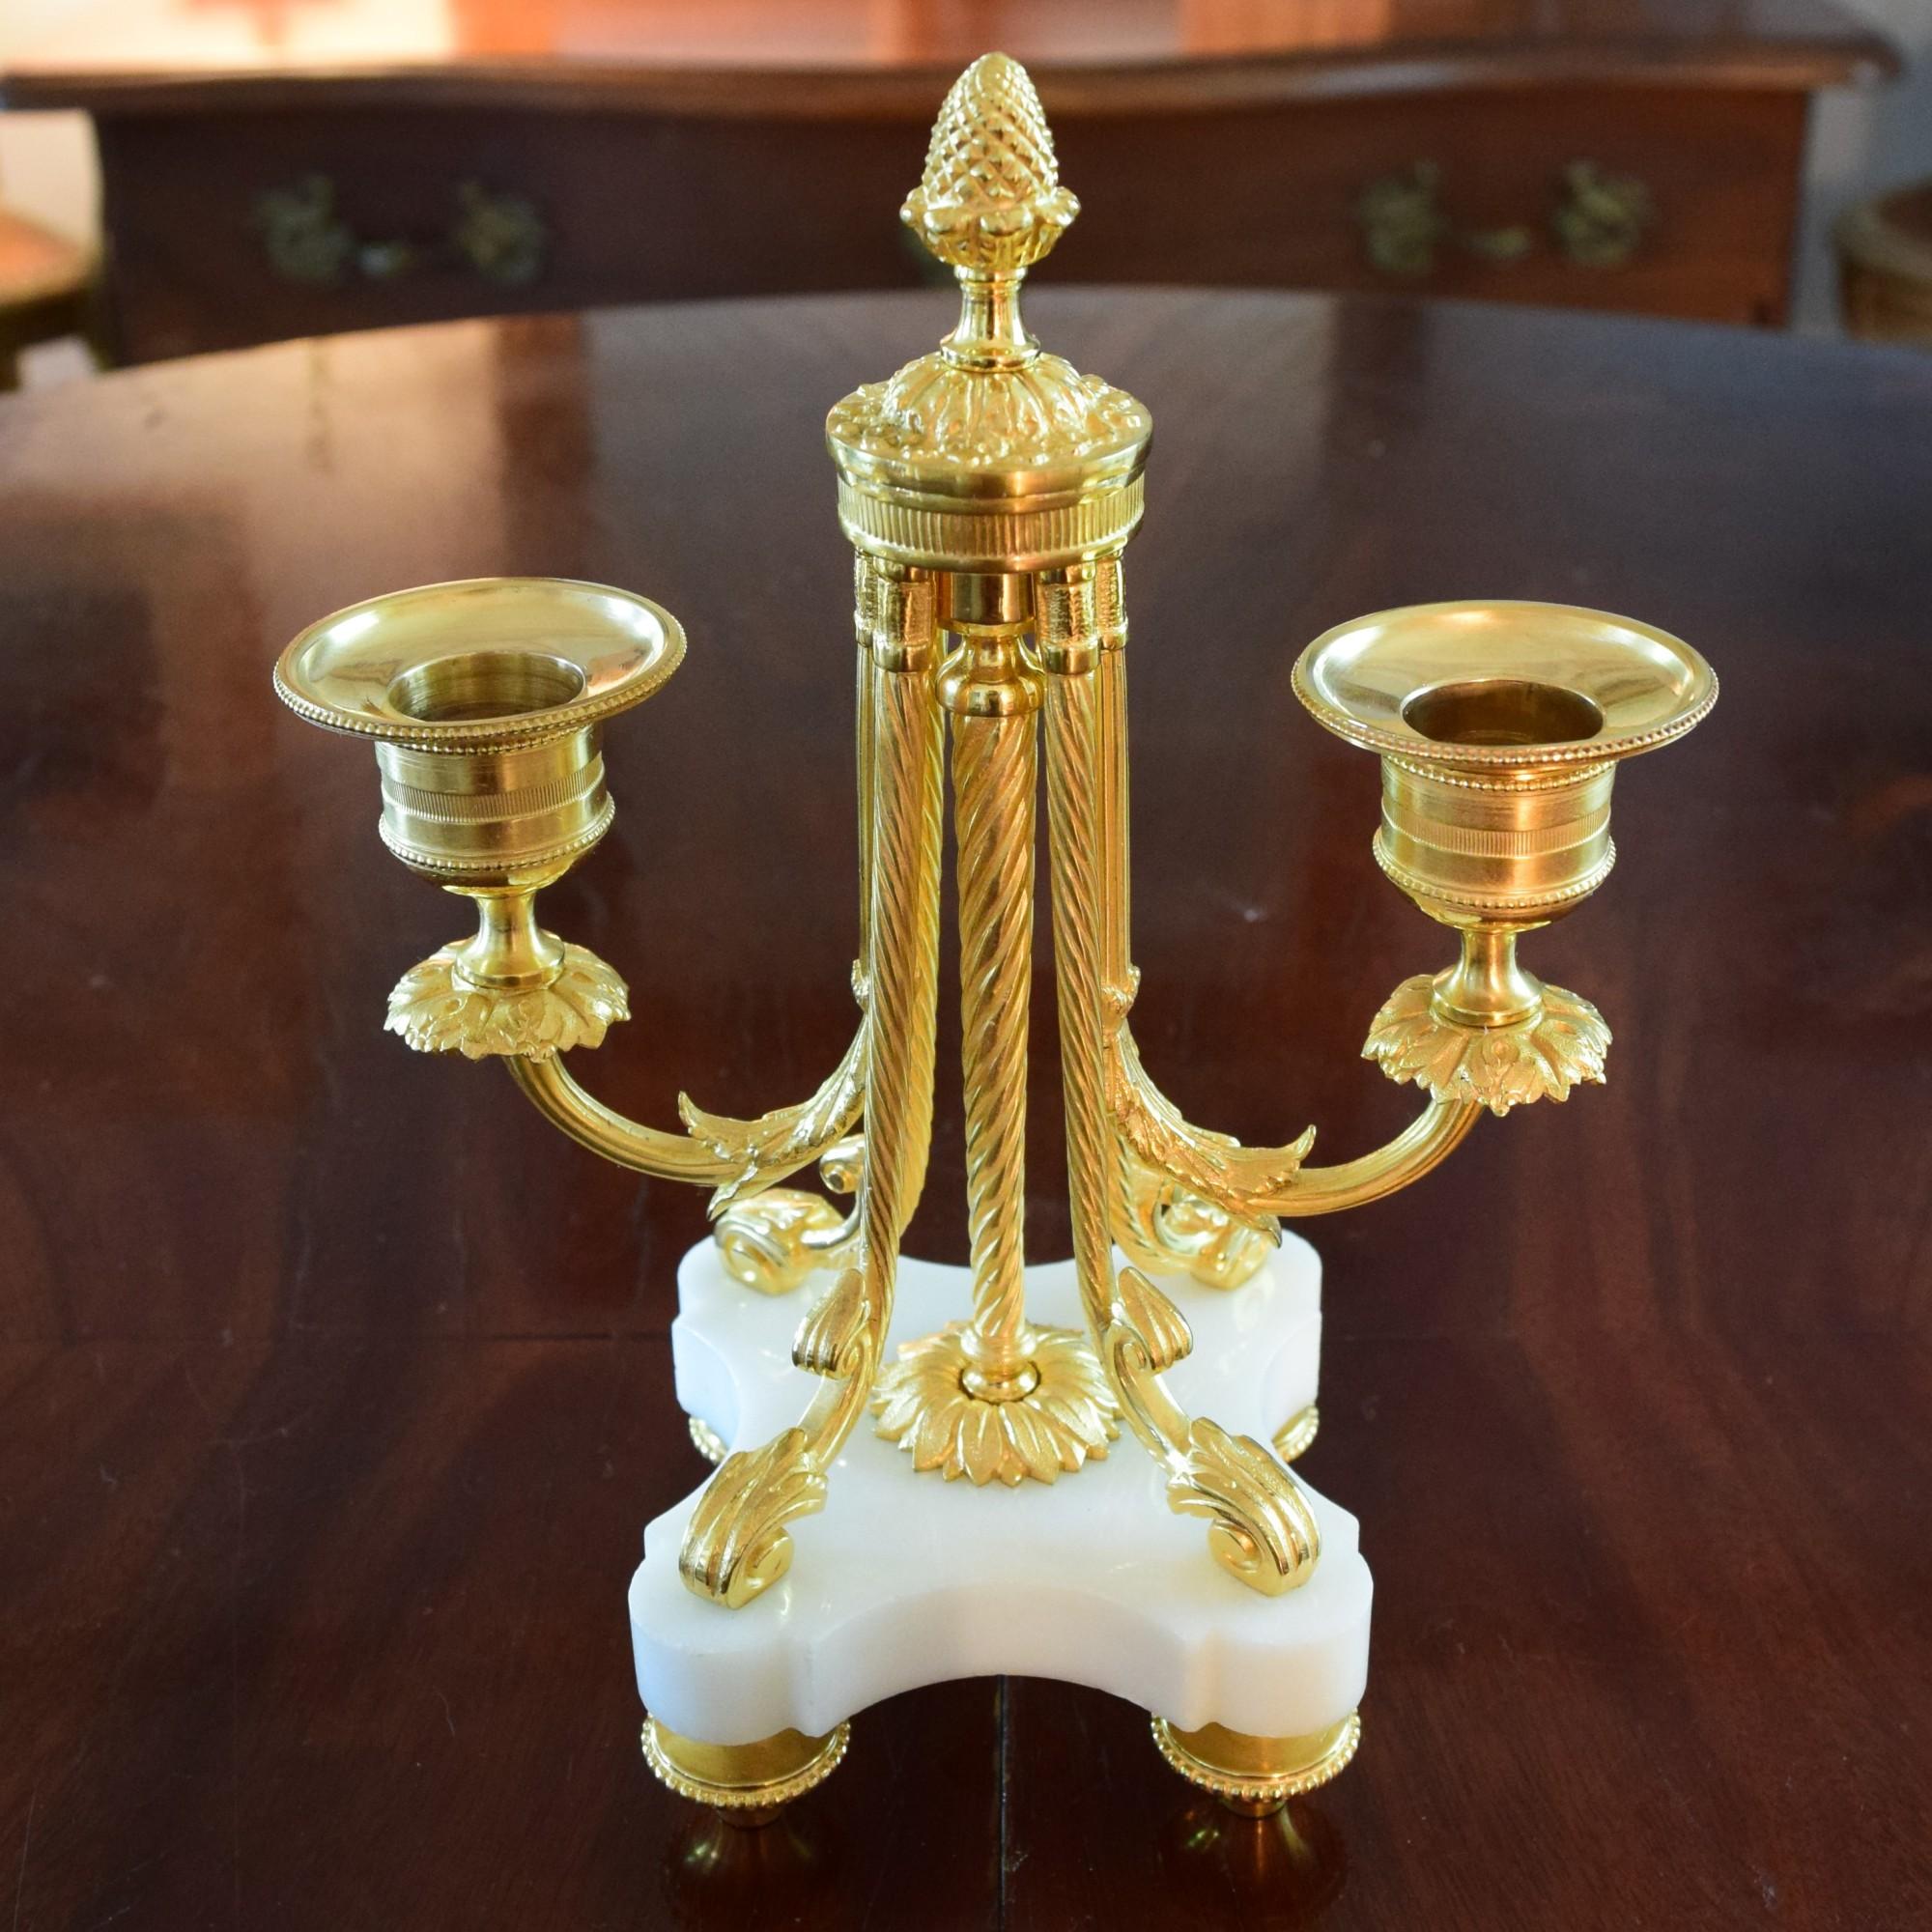 A Lovely Pair Of Louis XVI Style Ormolu and White Marble Two lights Candlesticks.

These ‘Bout de Table’ or End of Table Candlesticks are set in chiseled and gilded bronze, with white marble bases.
The arms of lights are decorated with laurel